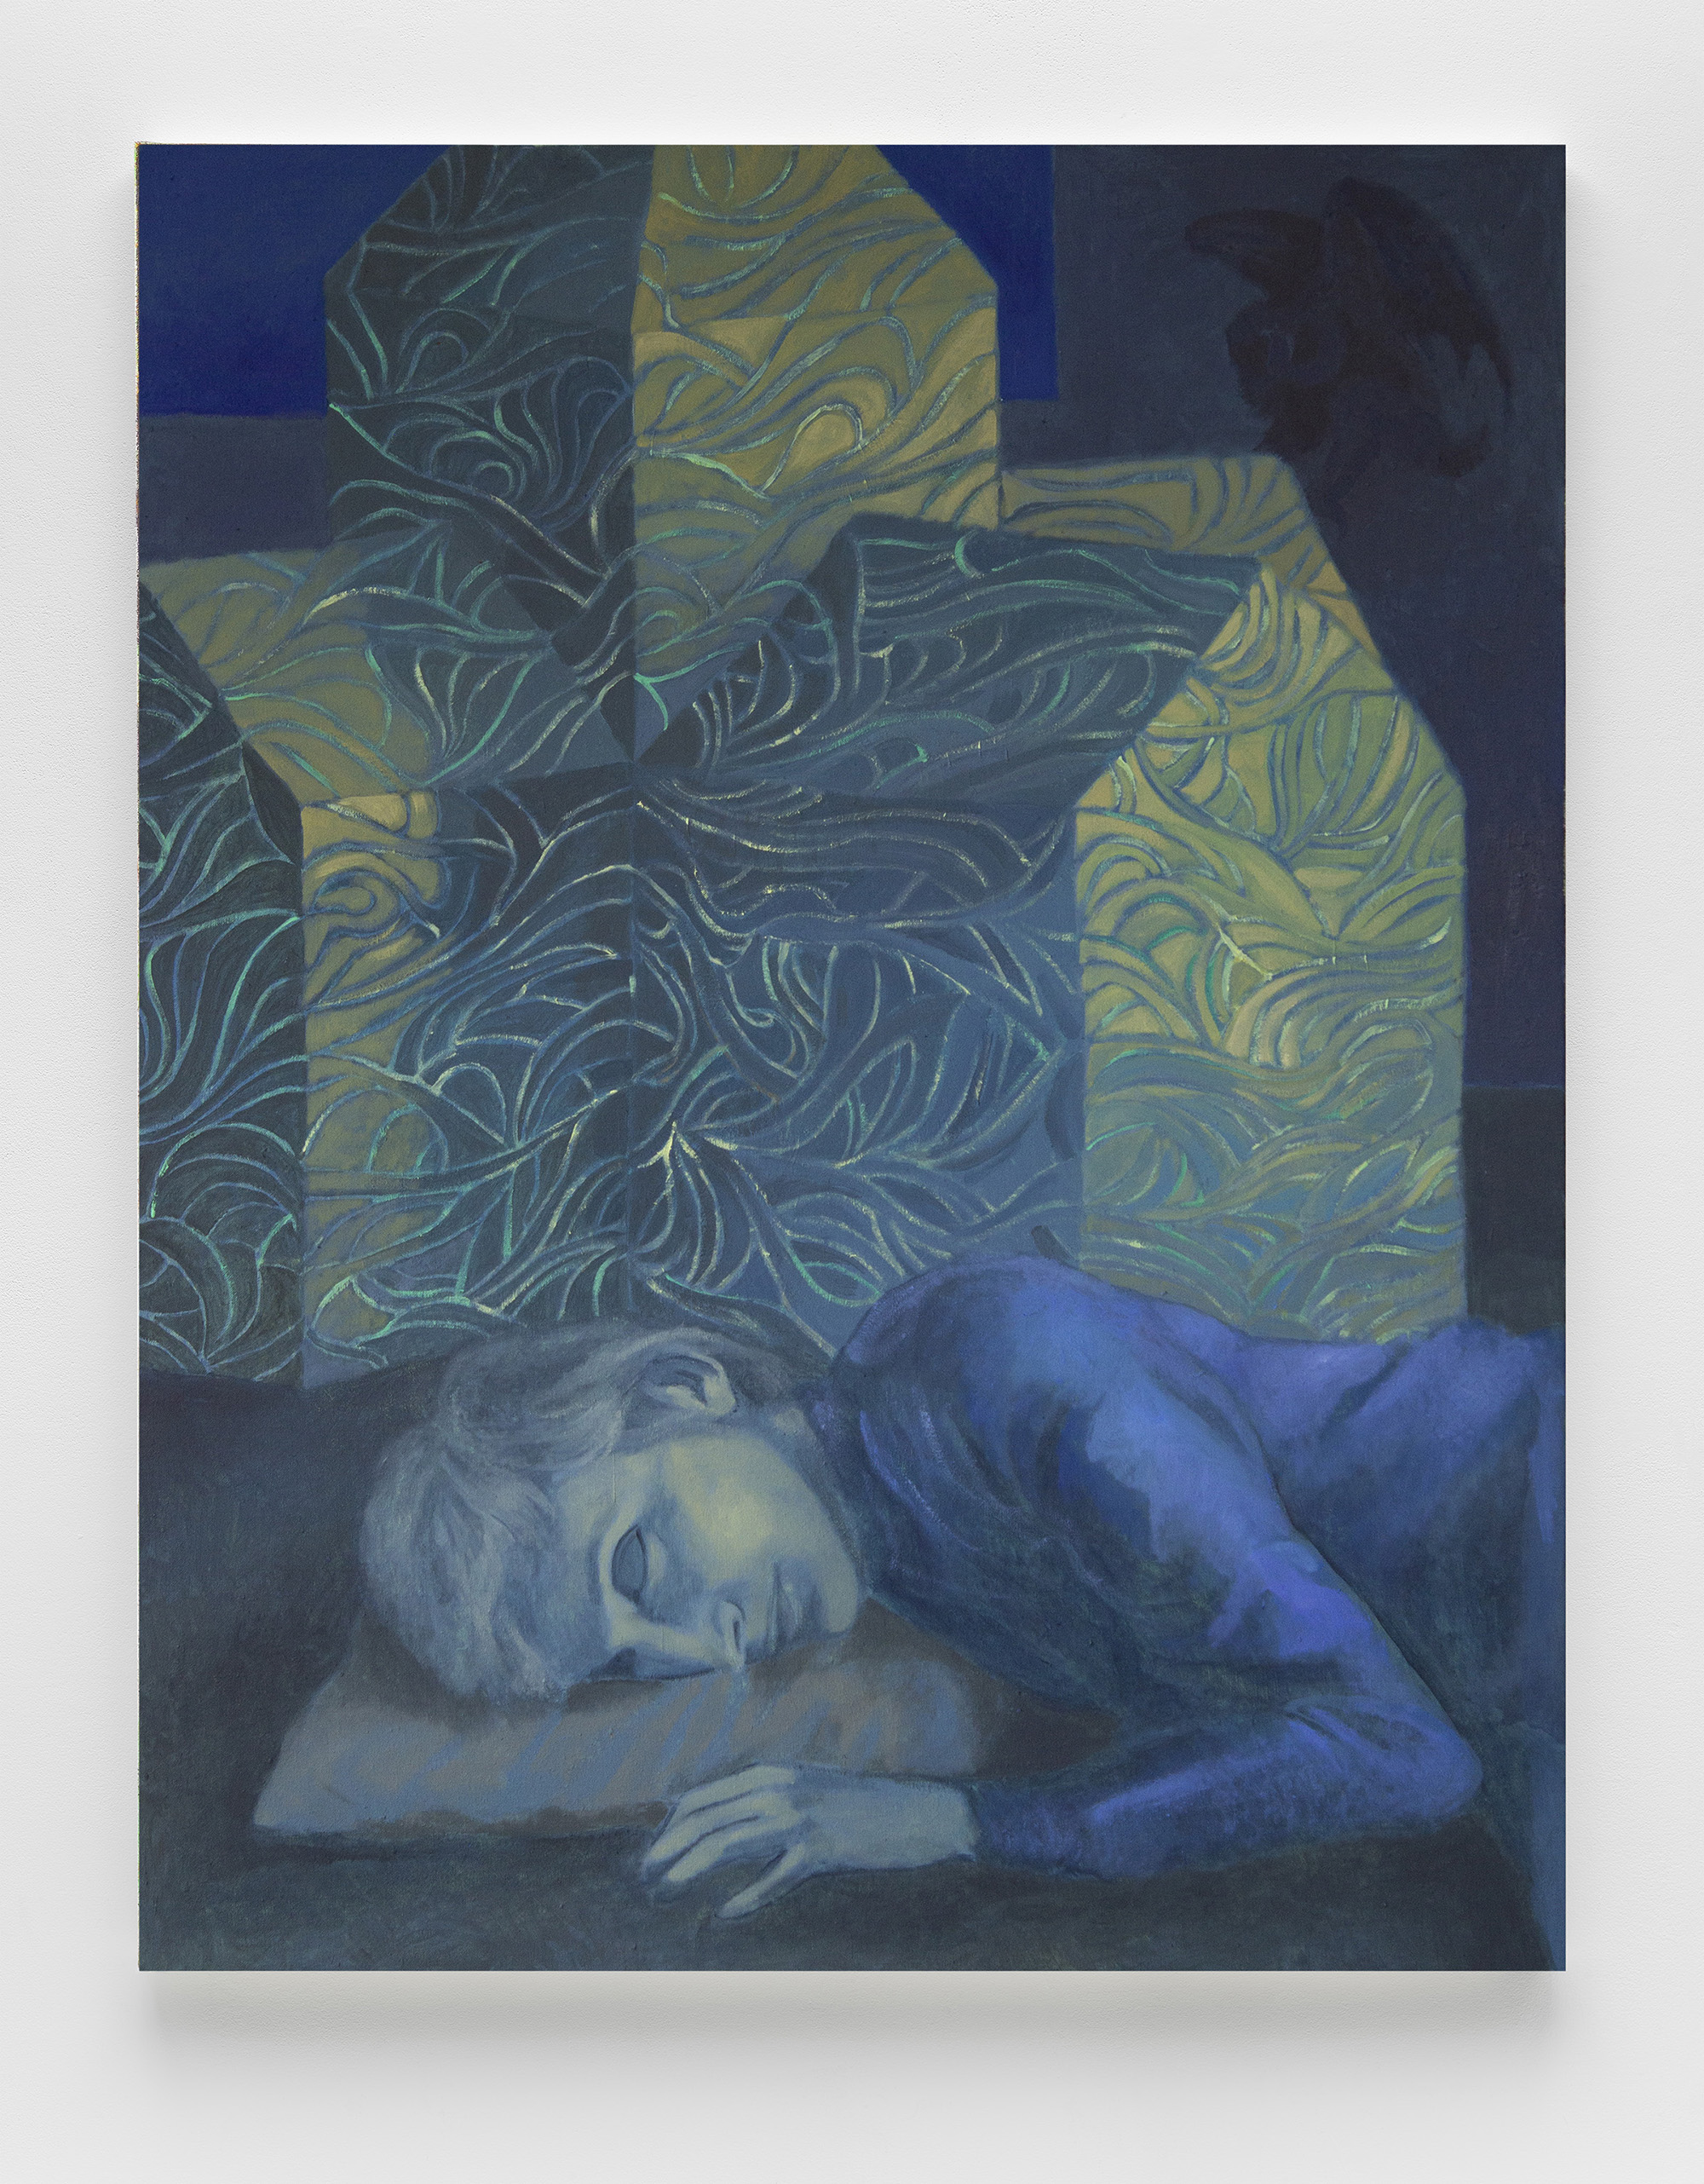 Alessandro Fogo, Sleep with one eye open, 2024, oil on linen, 95 x 75 cm, 37 3/8 x 29 1/2 in.